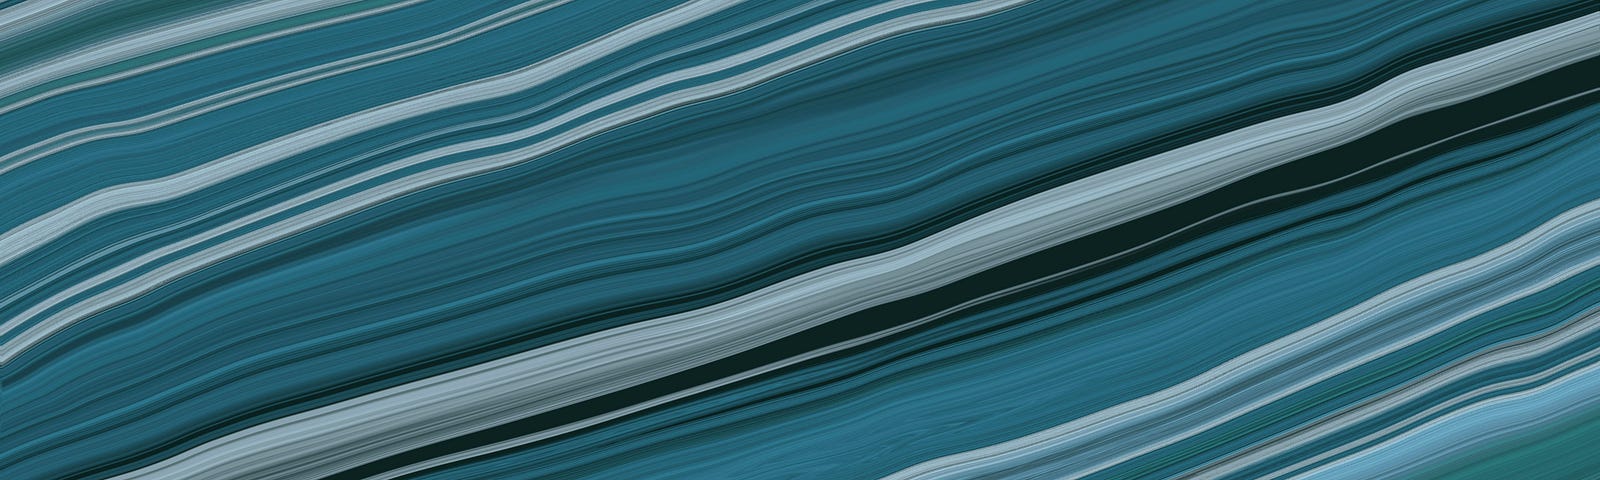 Blue streaks across a screen. Static which has interrupted the person speaking right before the silence.